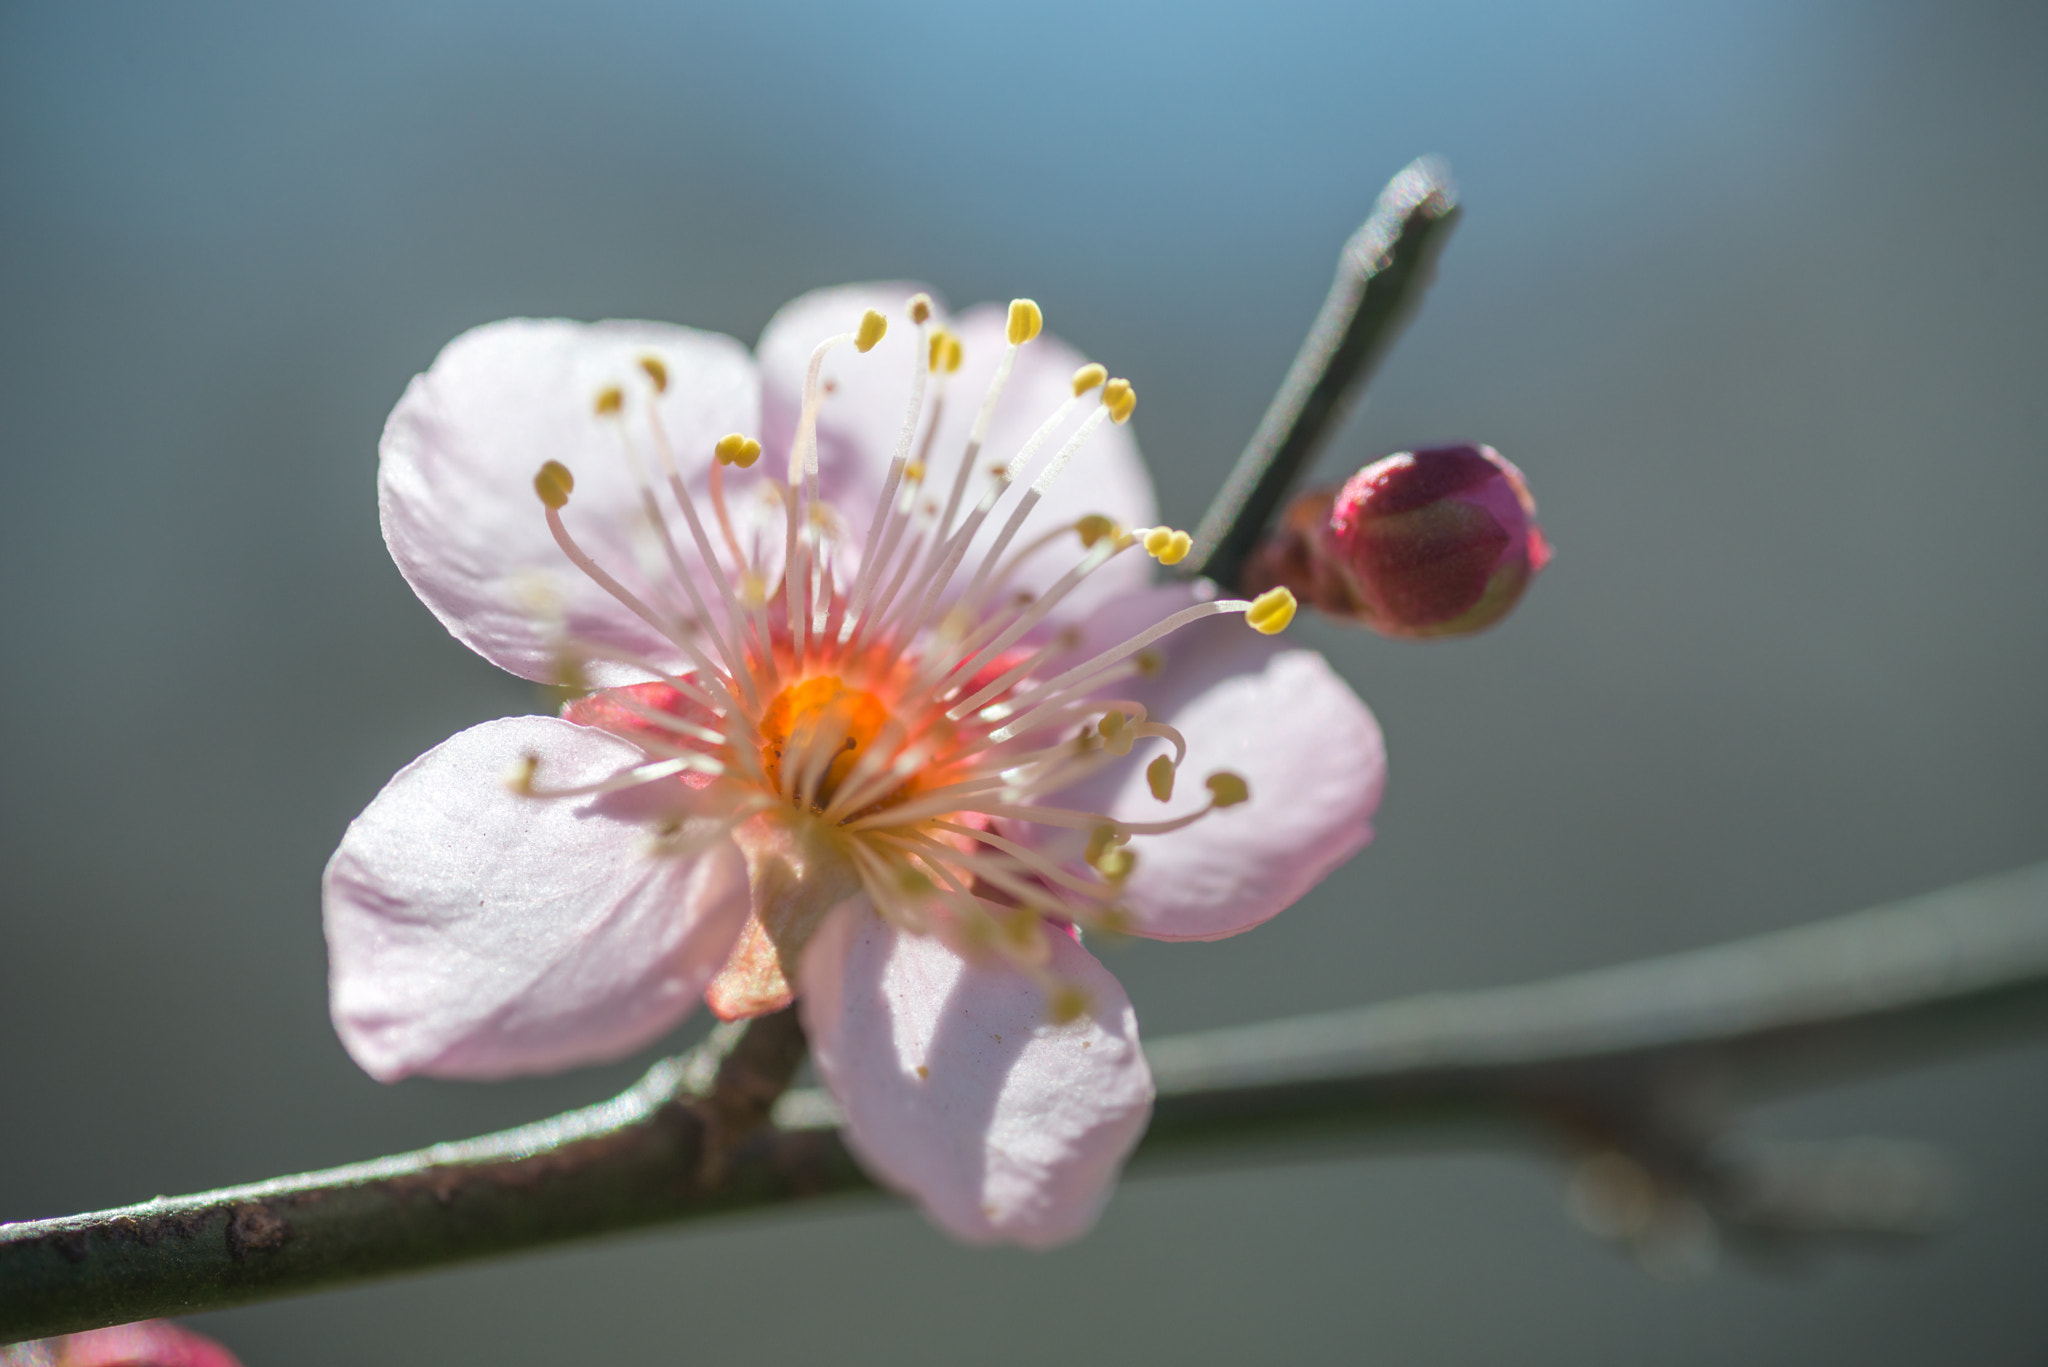 Nikon D800 + Tamron SP 90mm F2.8 Di VC USD 1:1 Macro sample photo. When the plum tree blooms with each new bloom, it's becoming warmer. photography